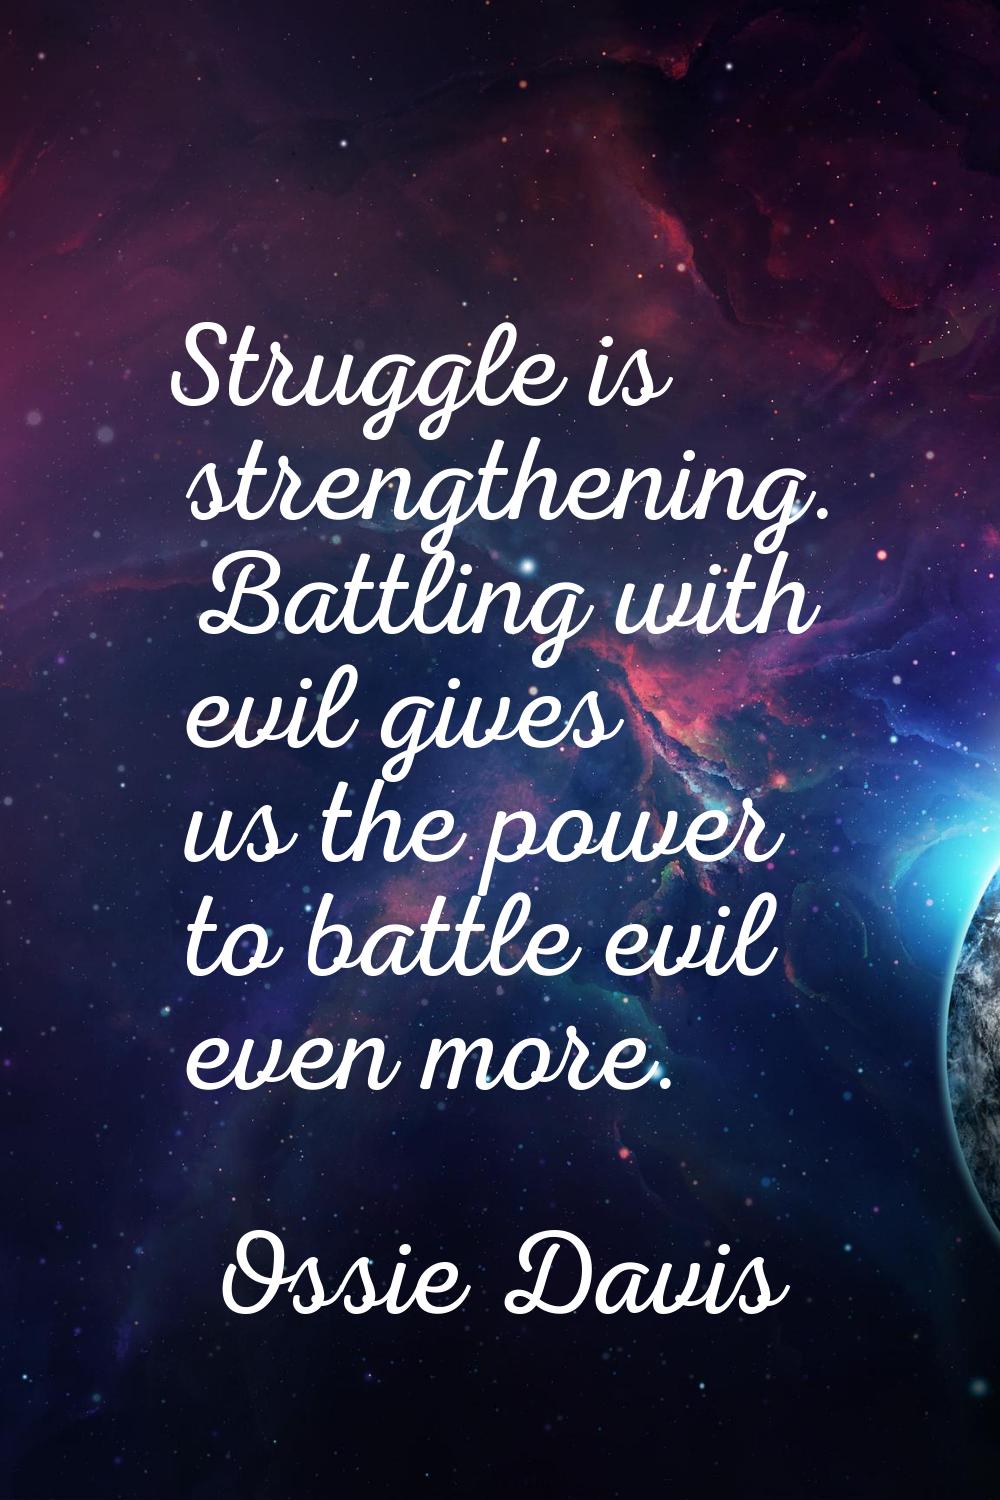 Struggle is strengthening. Battling with evil gives us the power to battle evil even more.